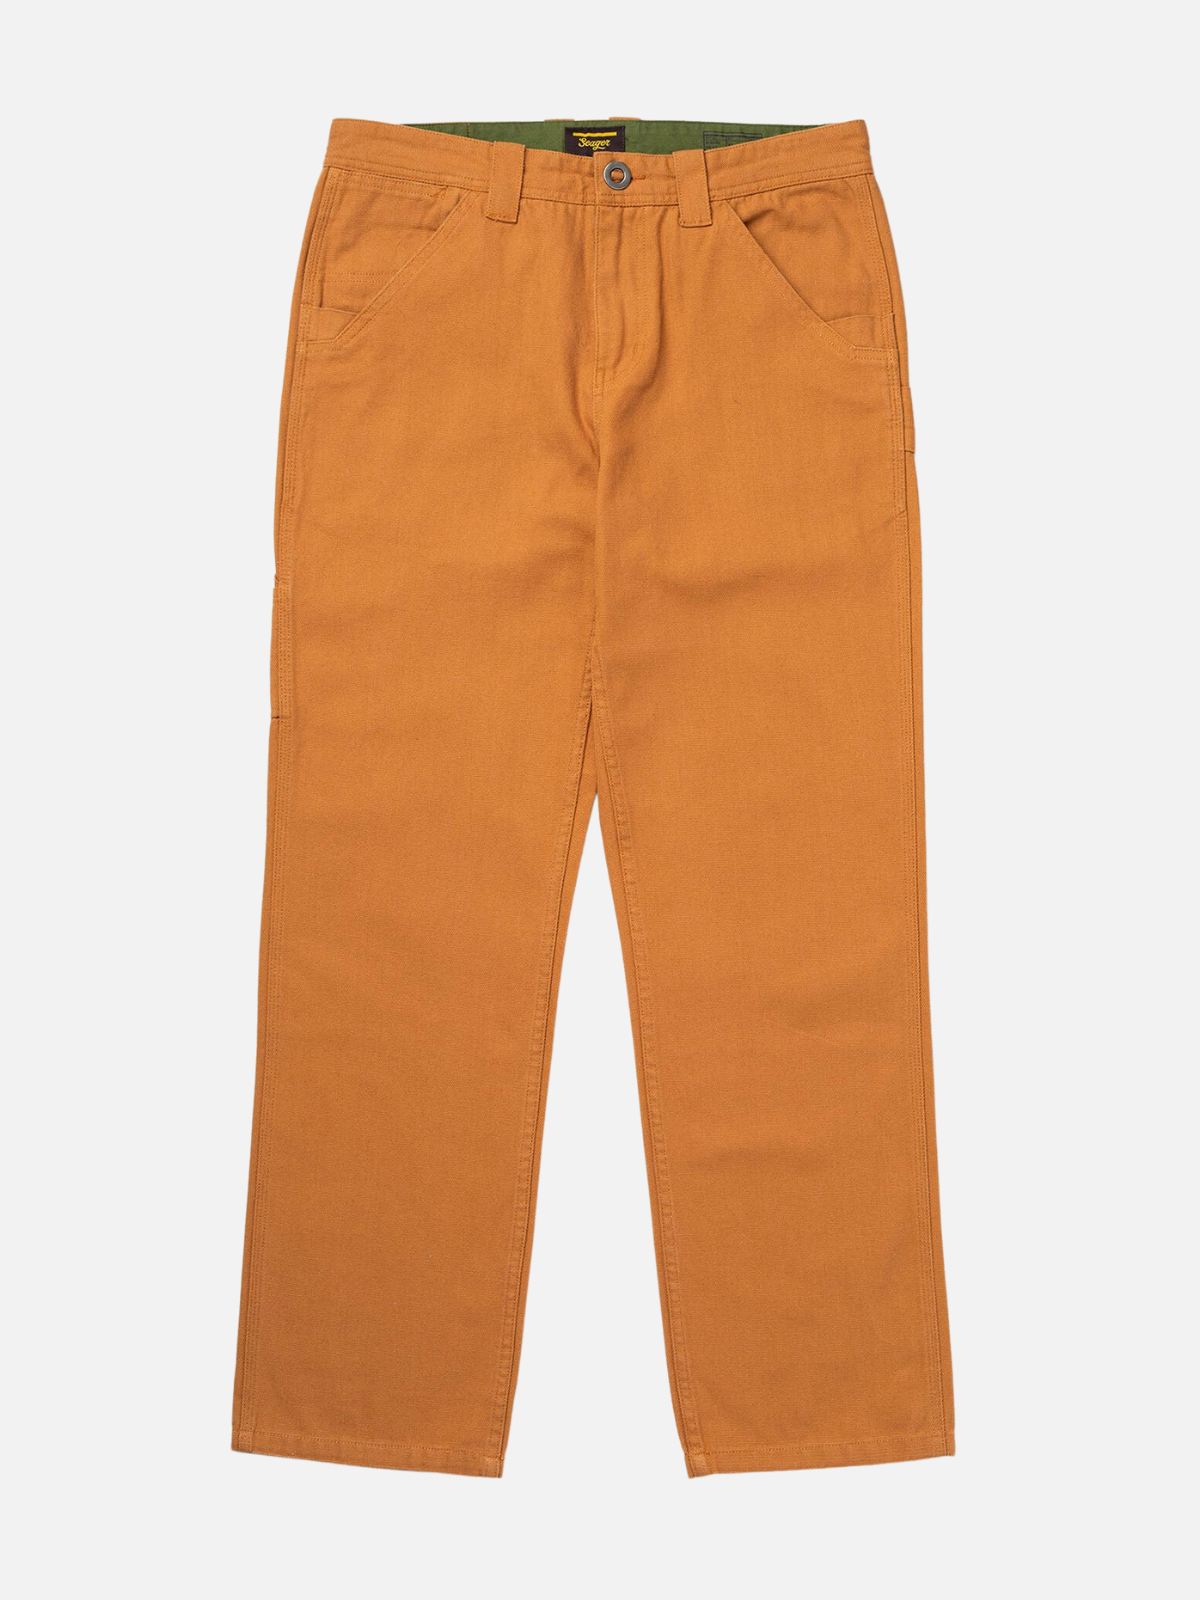 seager bison canvas pant coyote brown 100% cotton utility workwear relaxed fit pant kempt athens ga georgia men's clothing store